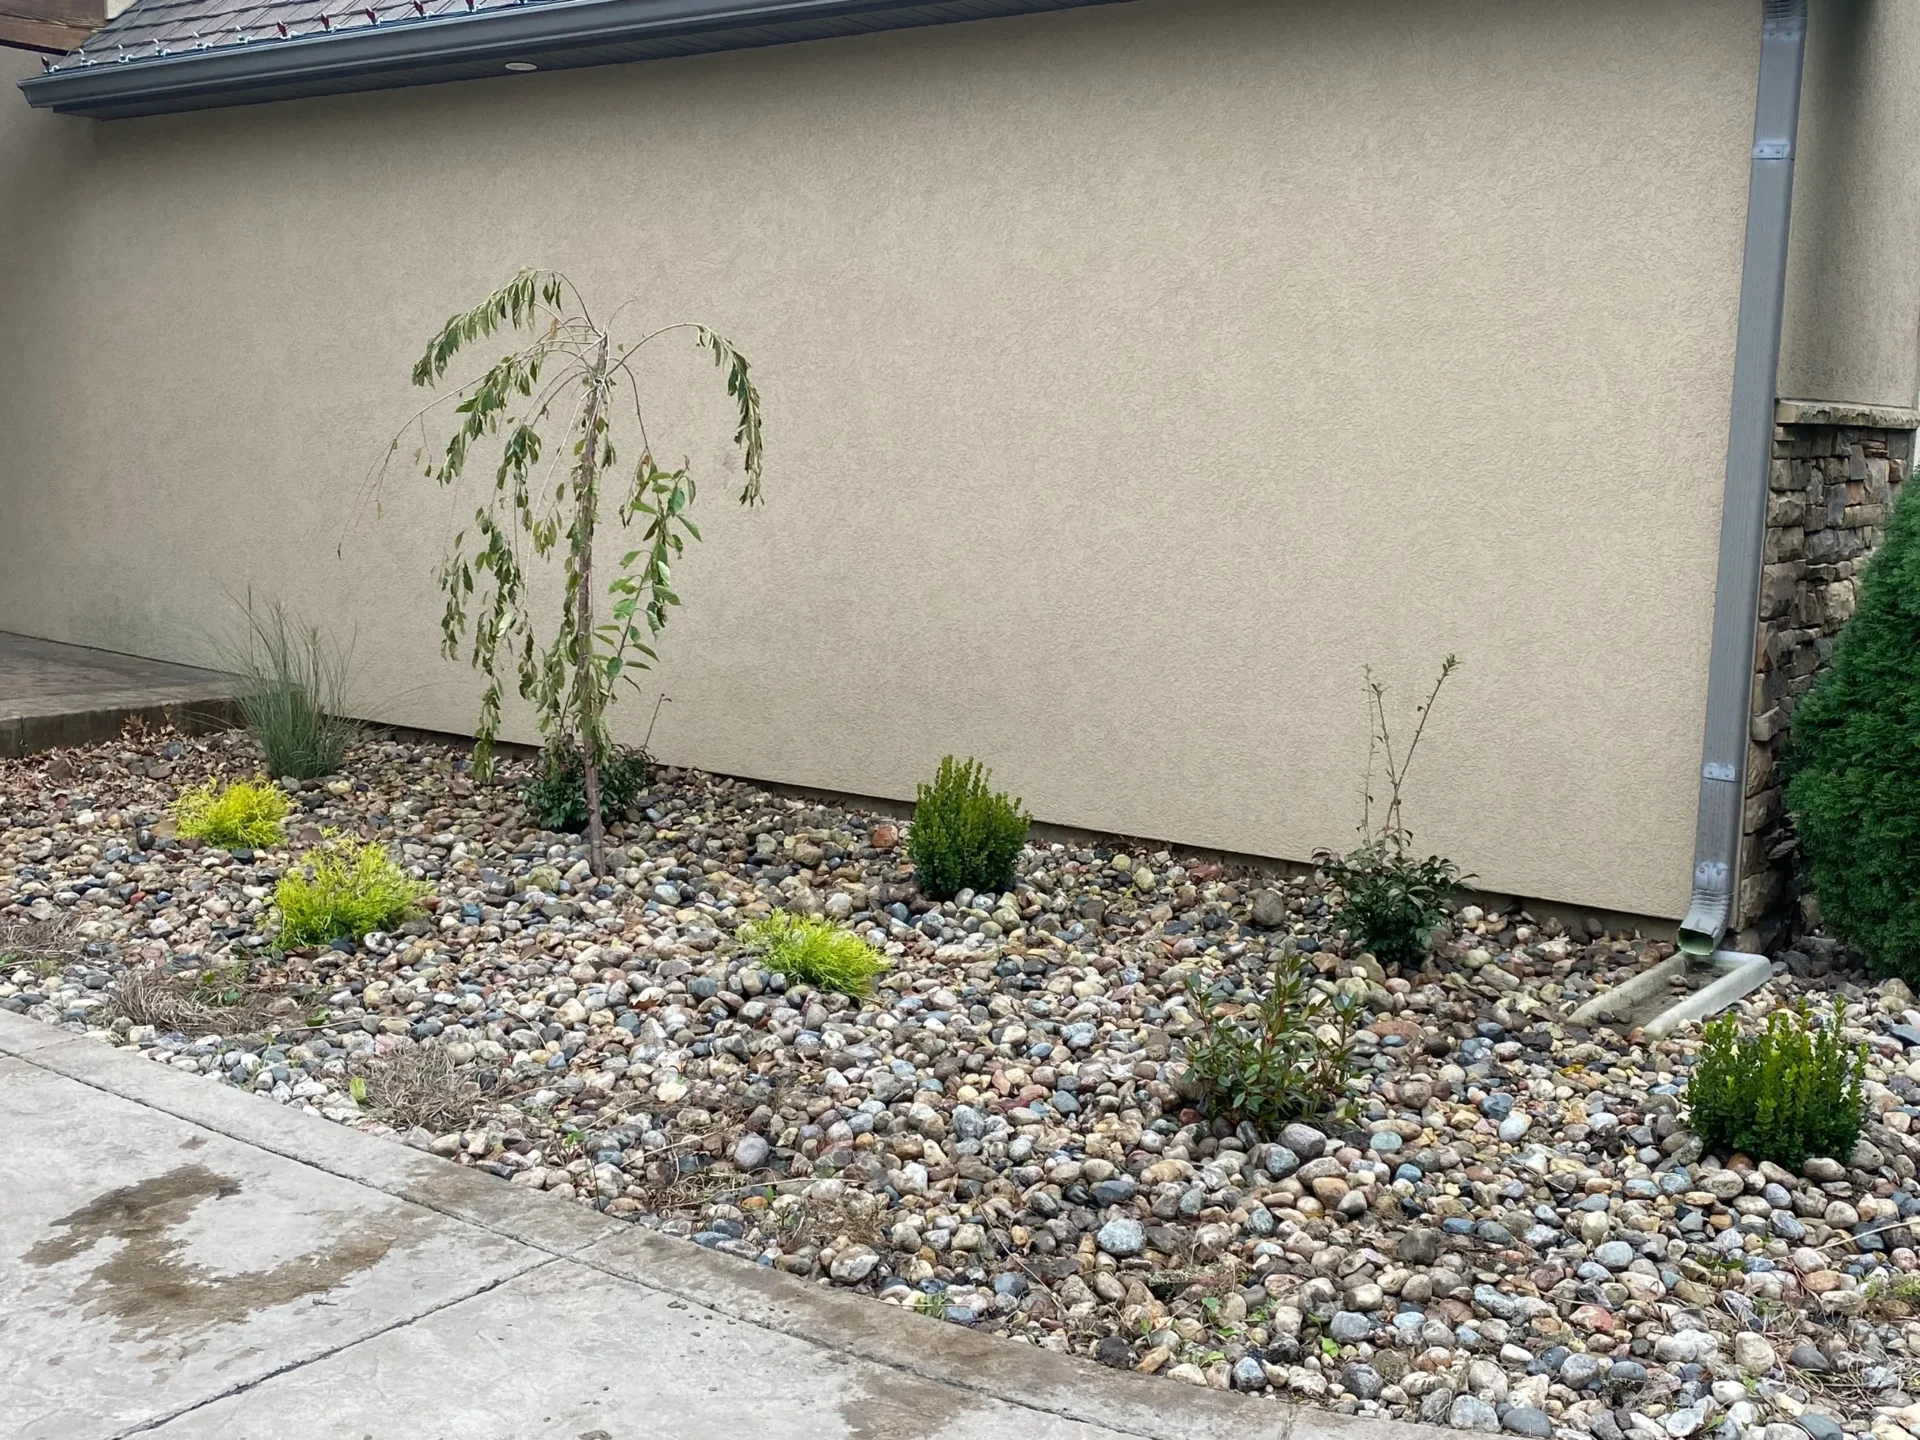 A small garden with plants and rocks in front of a building.